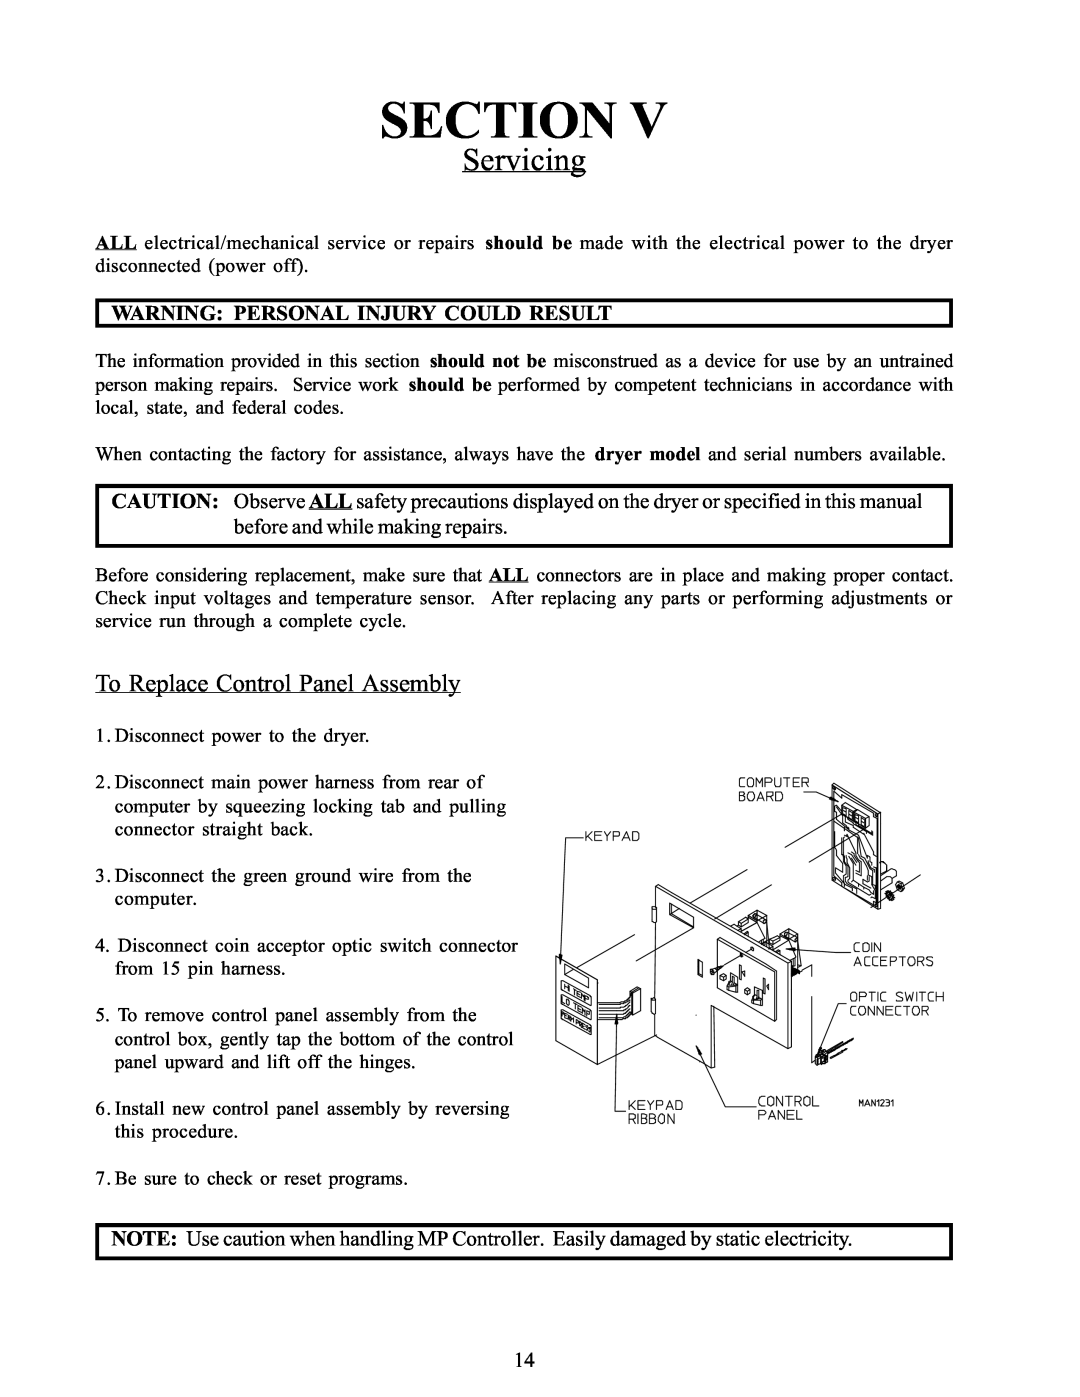 American Dryer Corp WDA-385 service manual Servicing, To Replace Control Panel Assembly, Section 